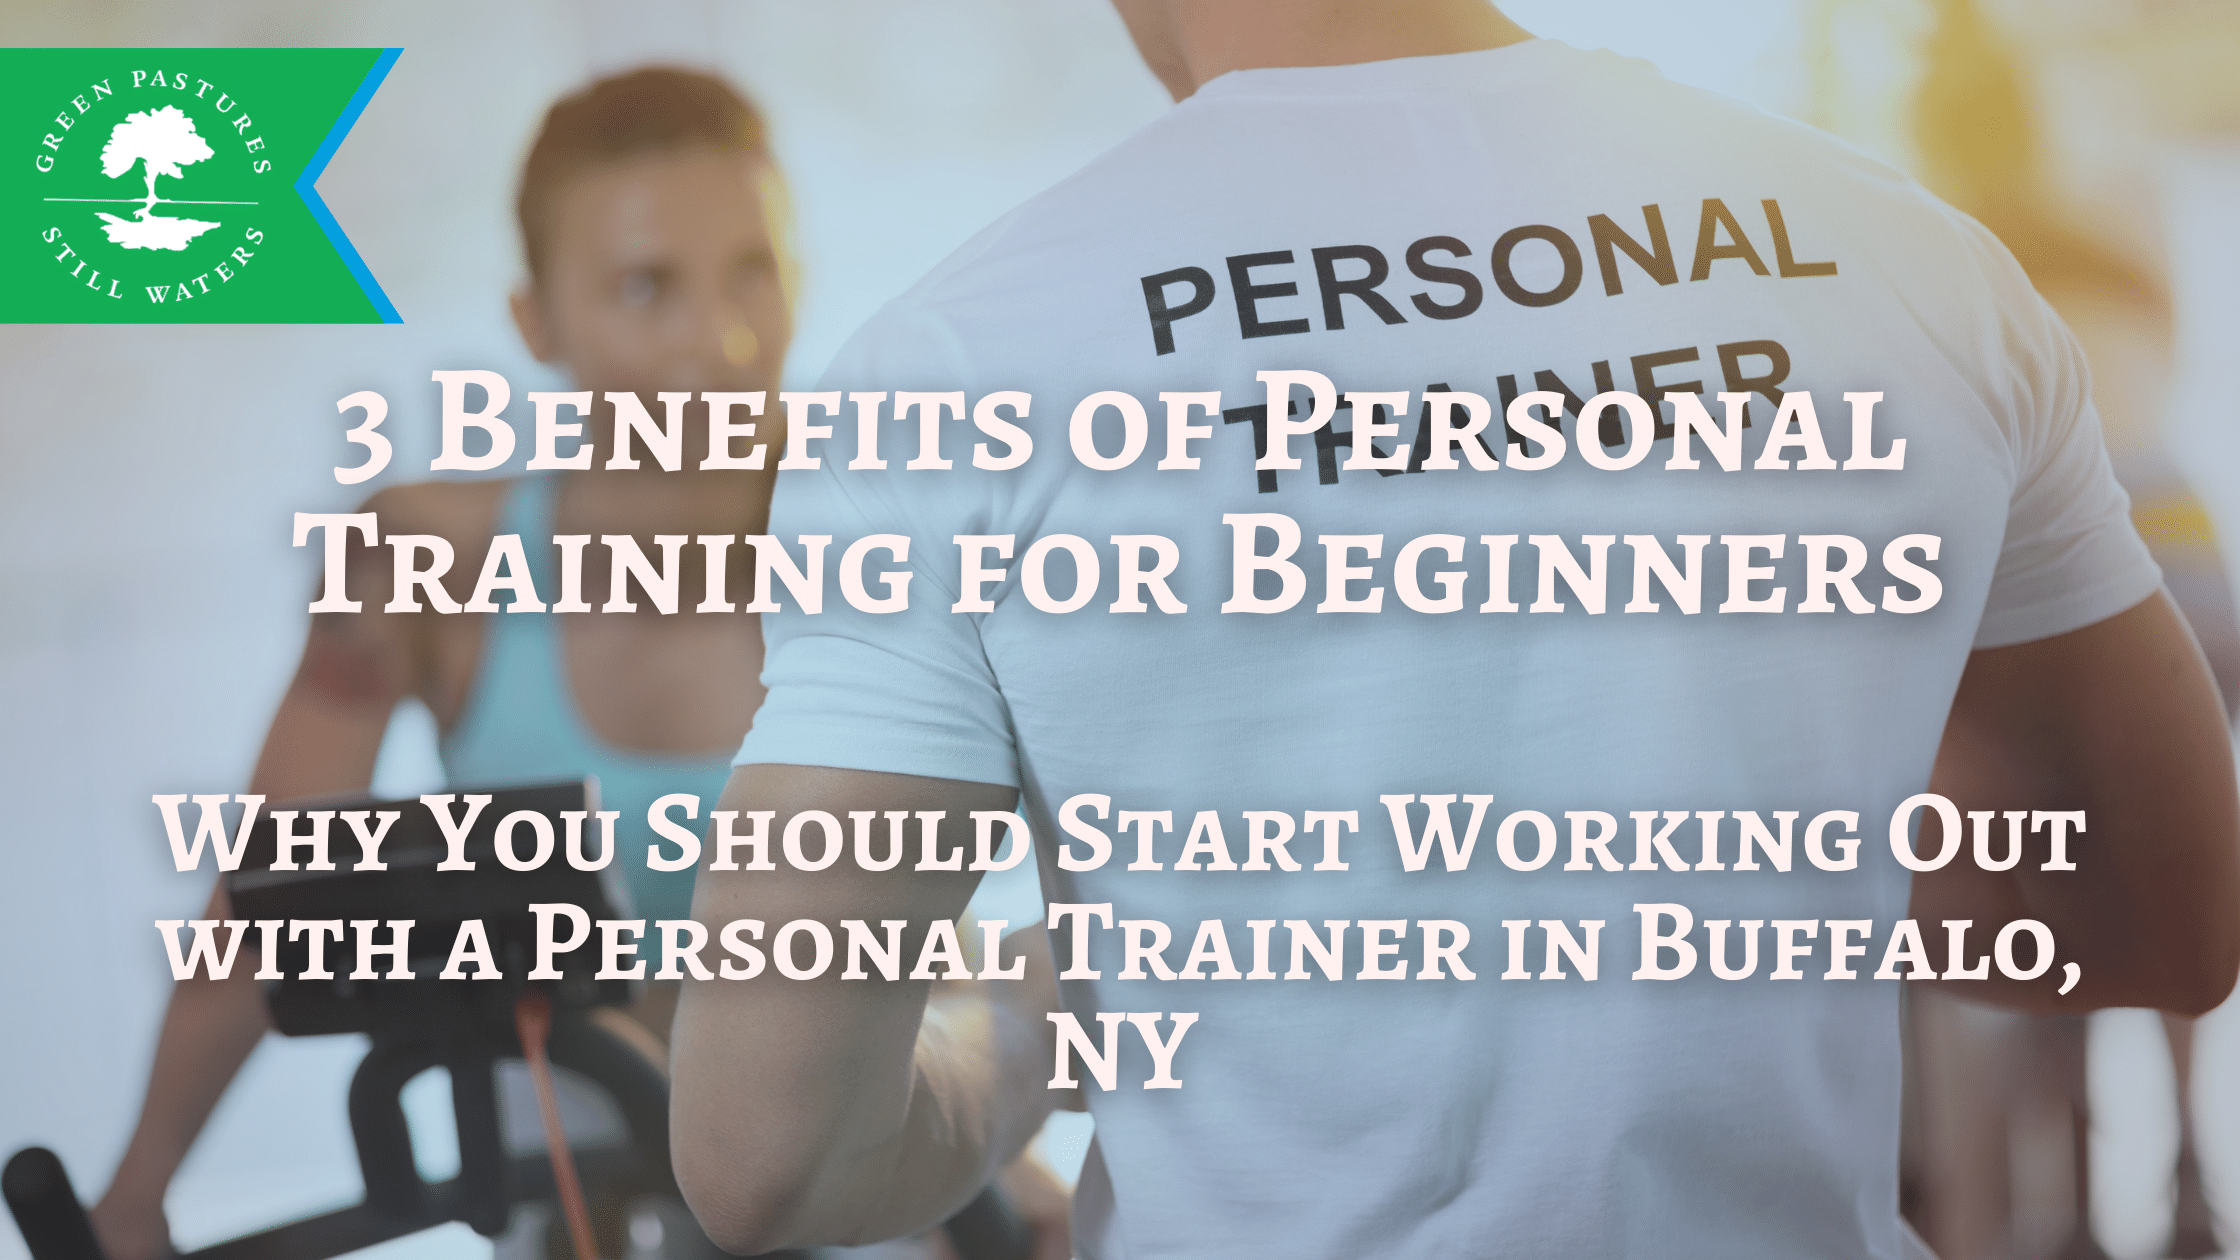 3 Important Benefits Of A Personal Trainer For Beginners In Buffalo